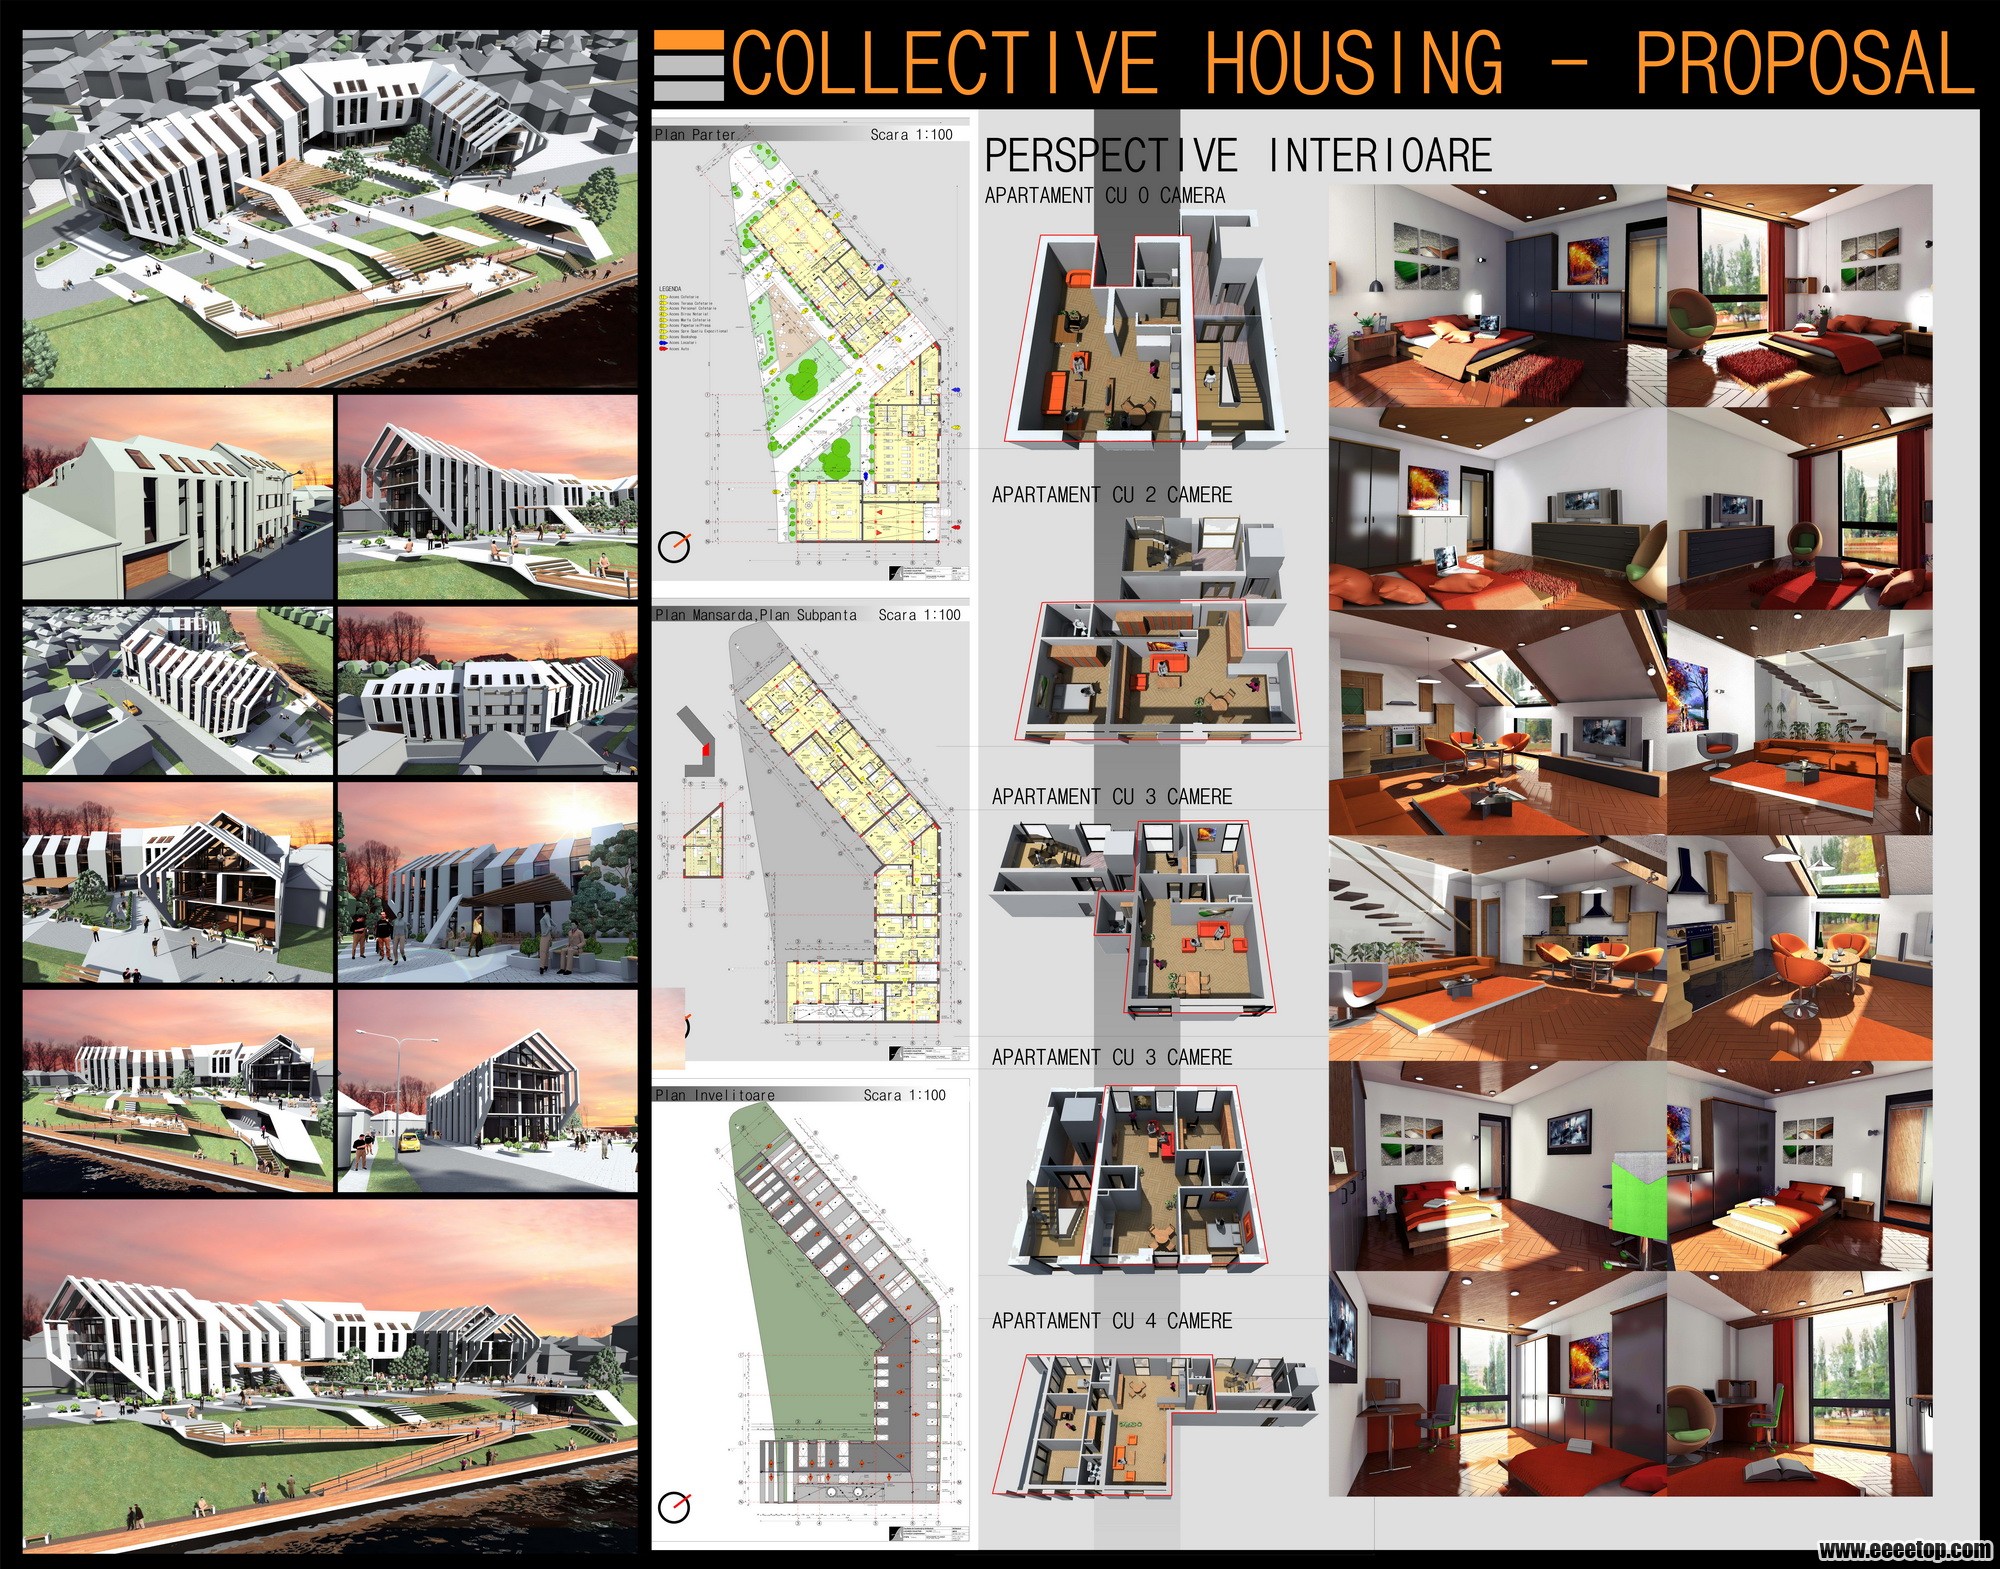 С_collective_housing_part_2_by_mousset.jpg